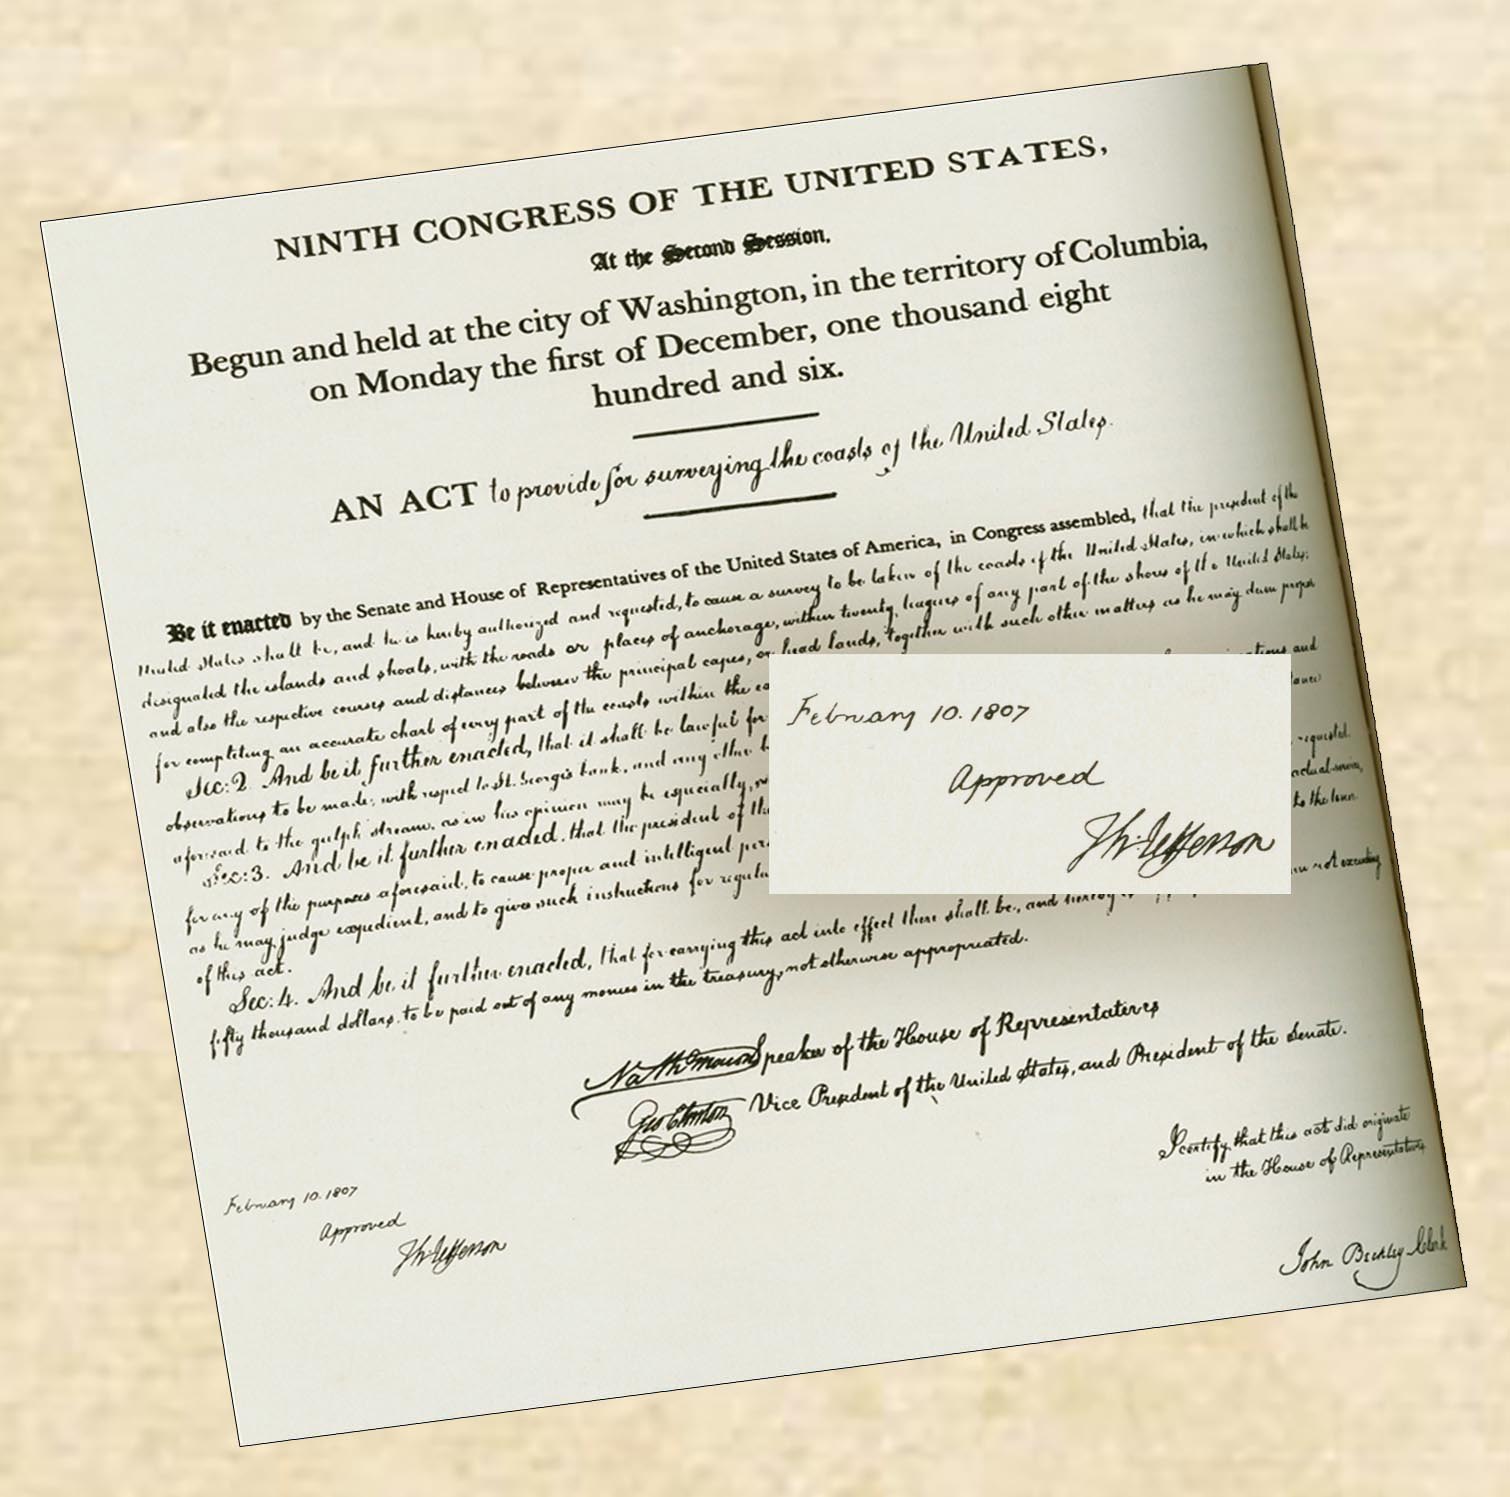 Image showing the initial legislation that led to the formation of the United States Coast Survey.